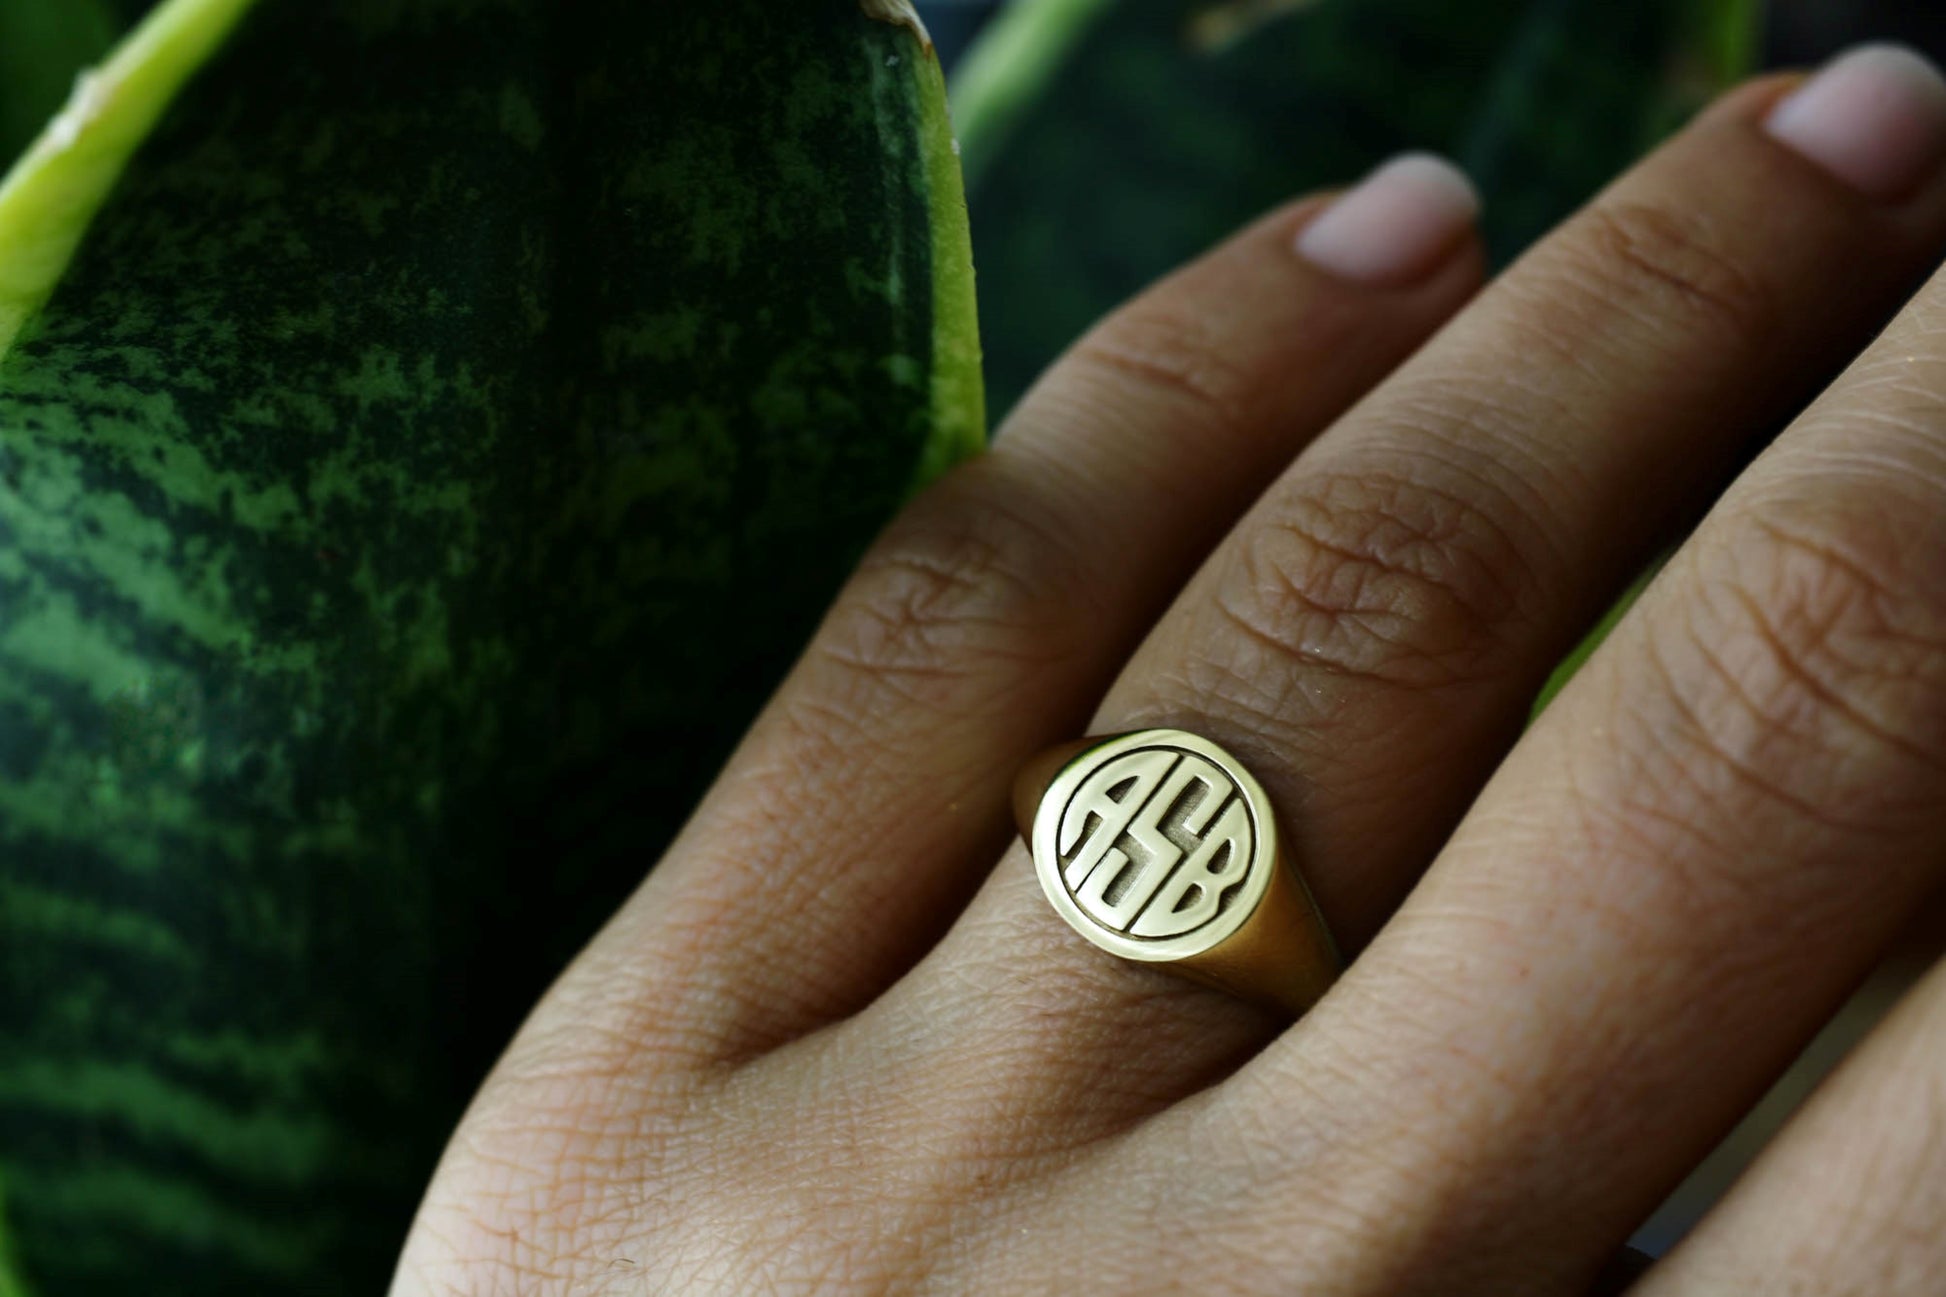 Initials & Diamonds Signet Ring - Solid Gold, Signet ring, Monogram Ring, Initial Ring, Diamond